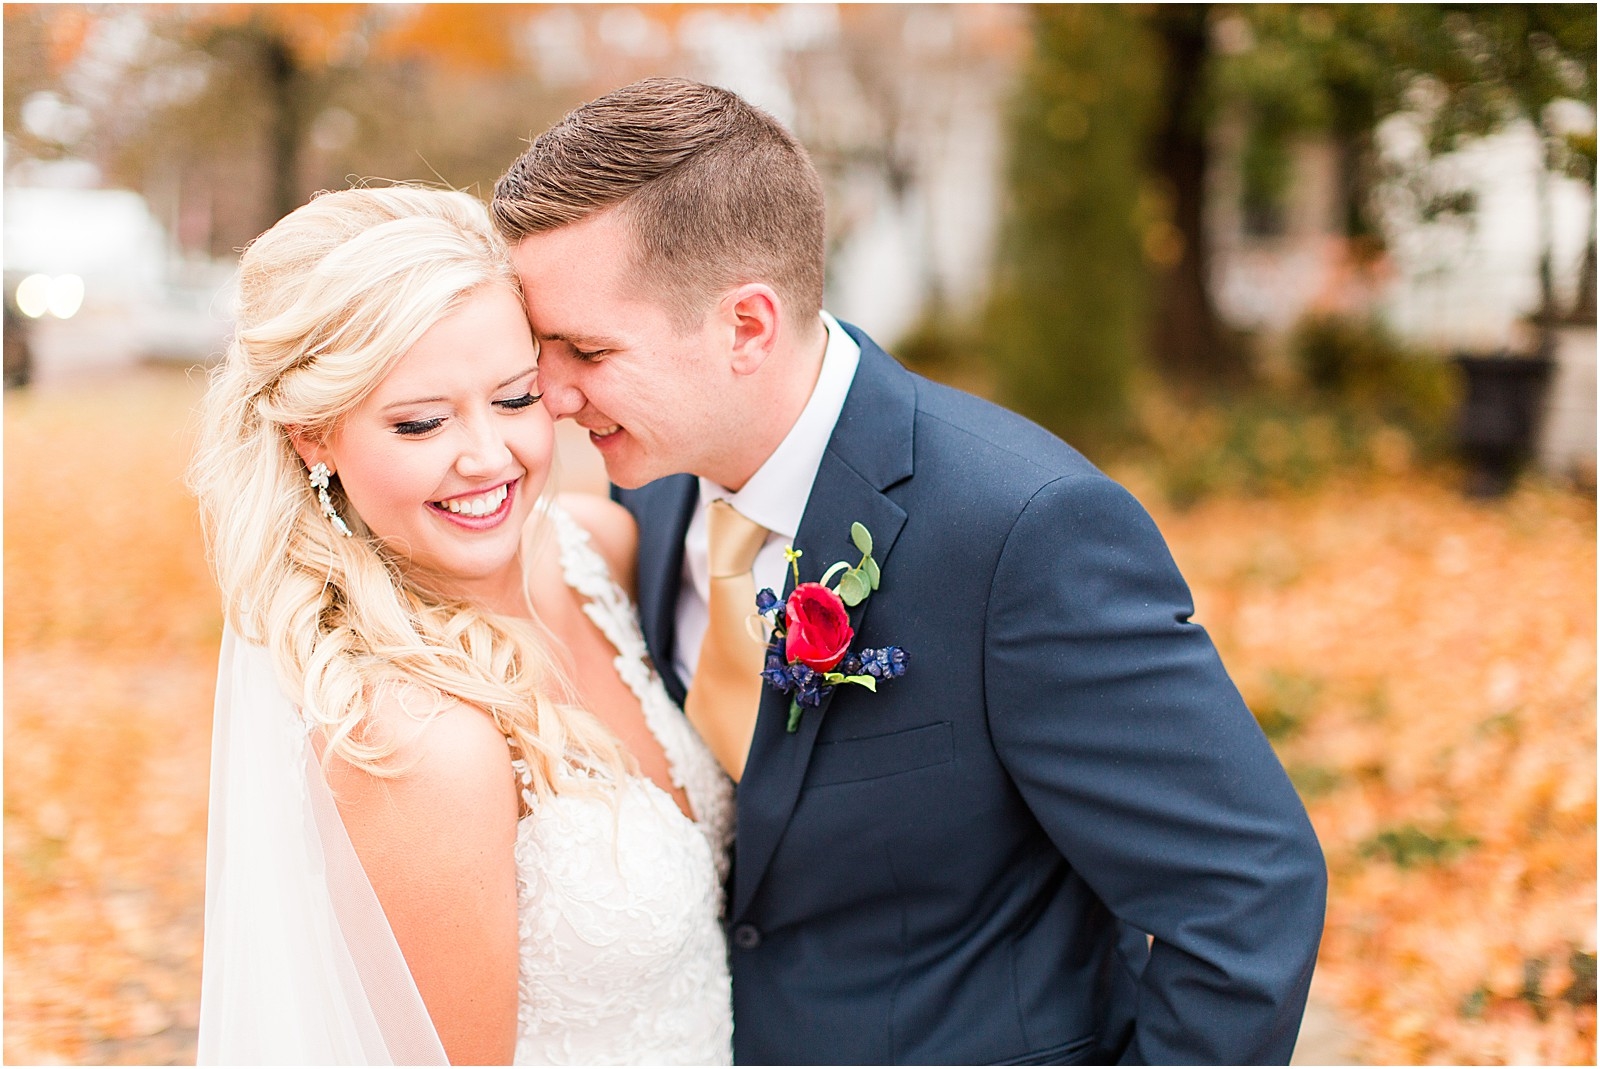 Haylee and Dillon's Evansville, Indiana wedding by Bret and Brandie Photography.0071.jpg